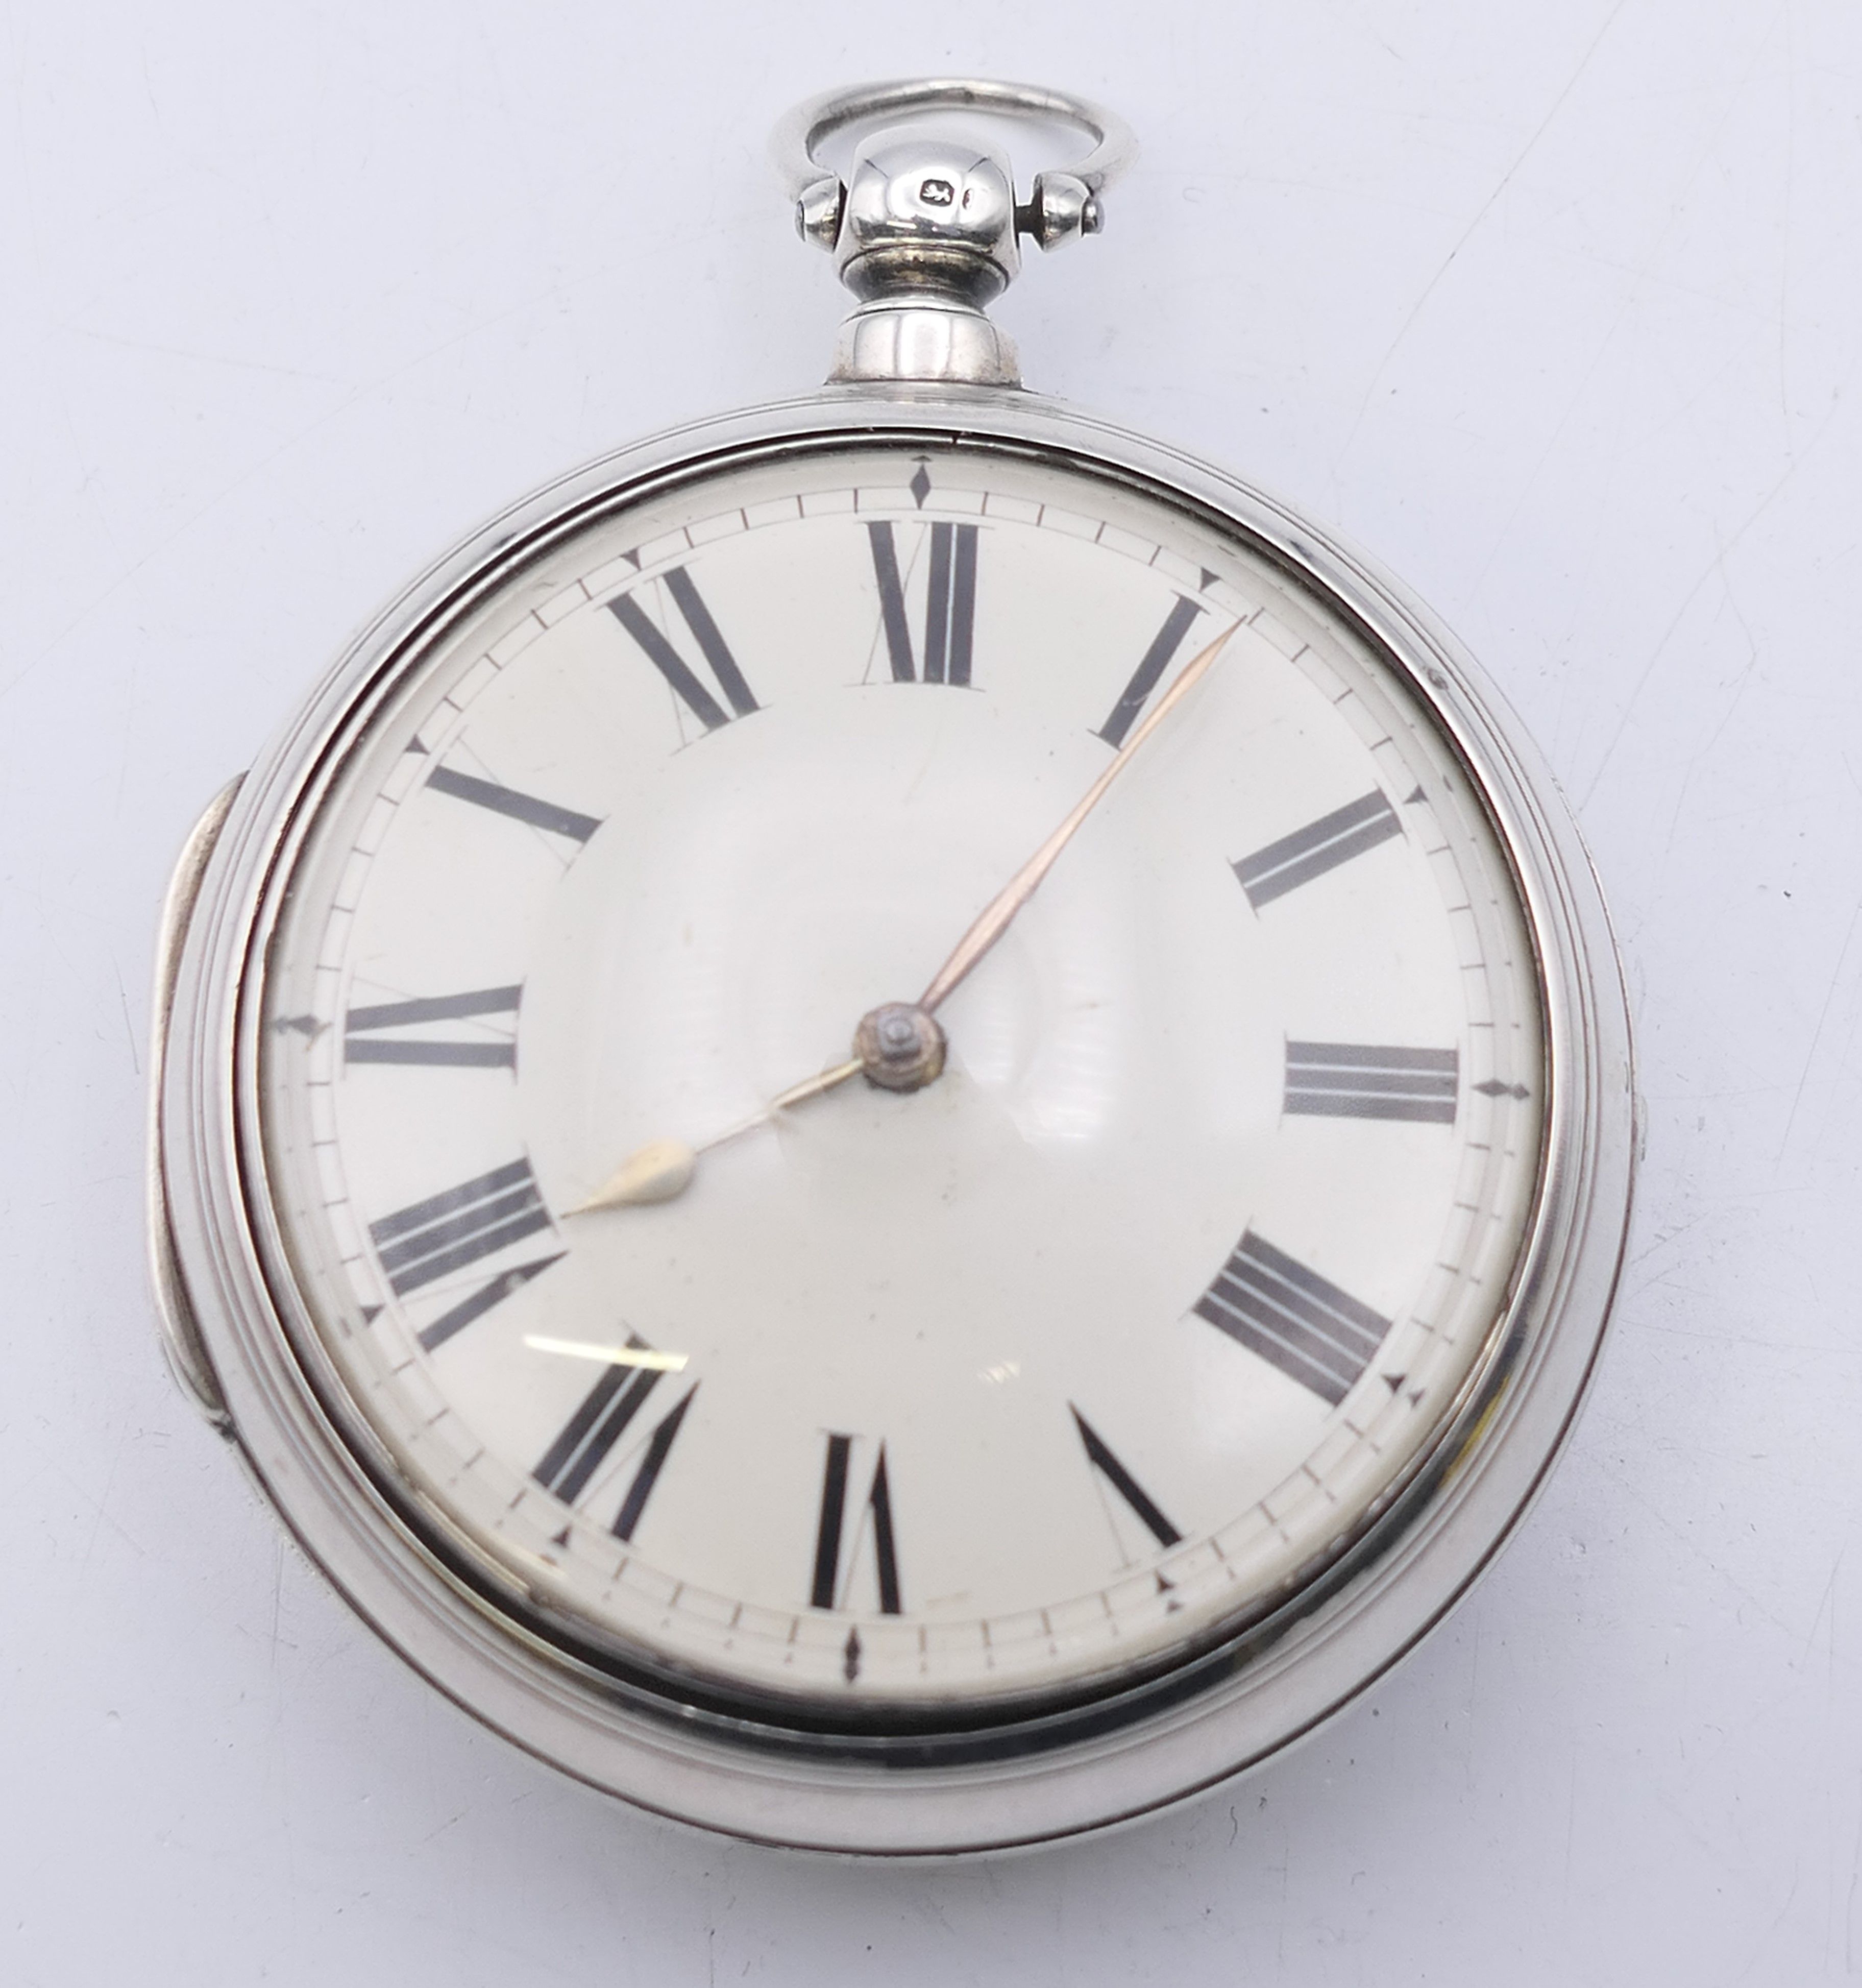 A W Tanner Watchmaker silver pair cased pocket watch, hallmarked Chester 1876, serial number 172.